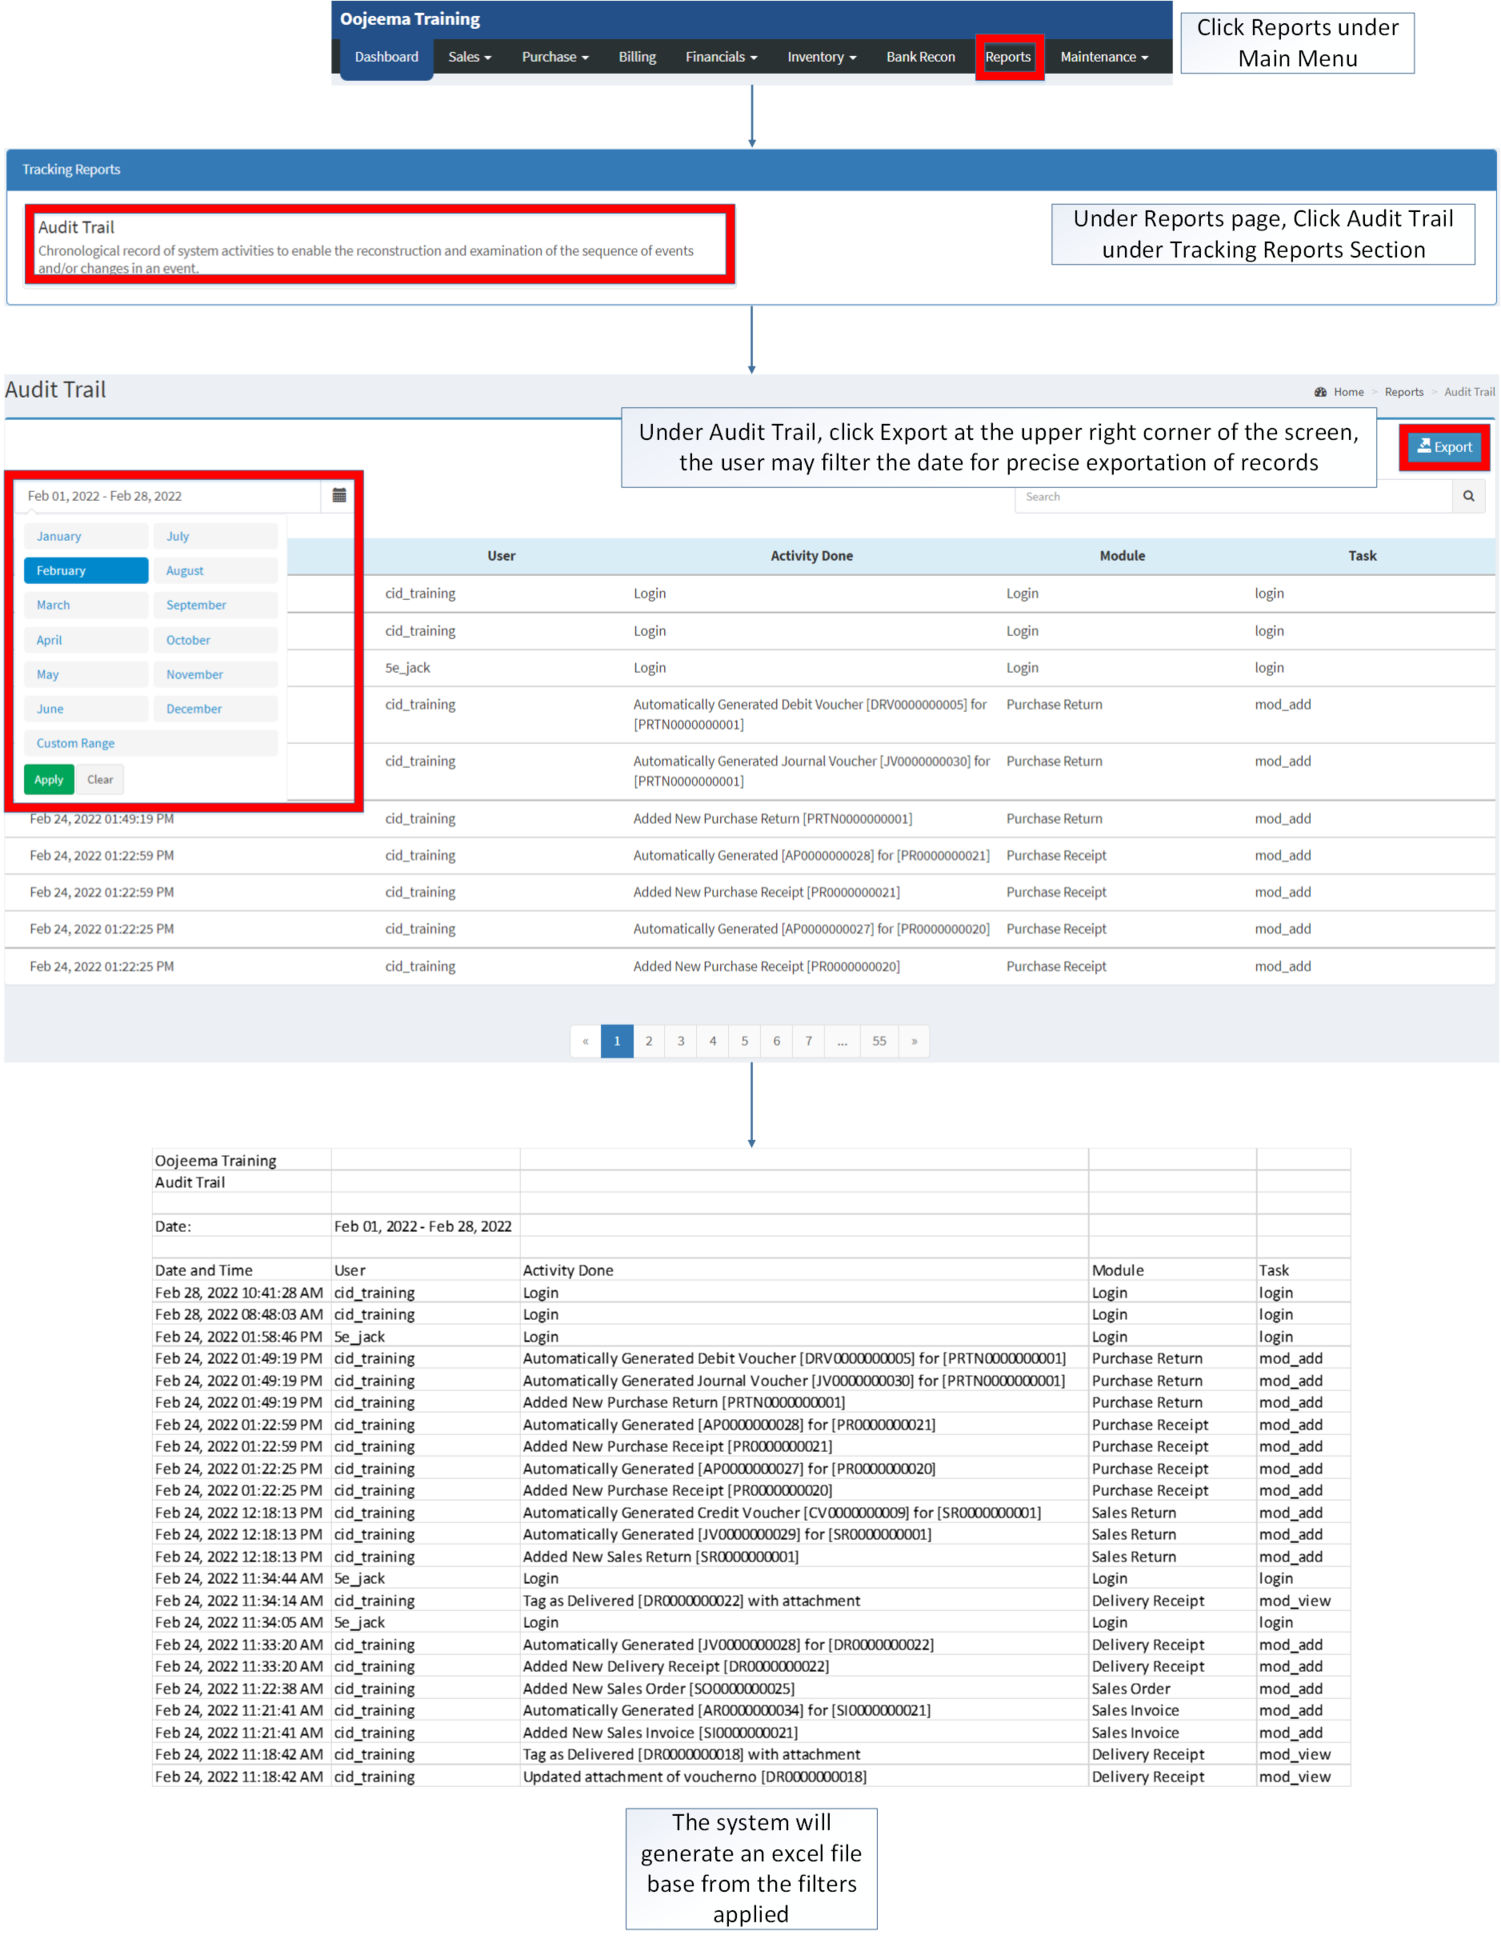 Tracking Reports - Audit Trail - Export.png